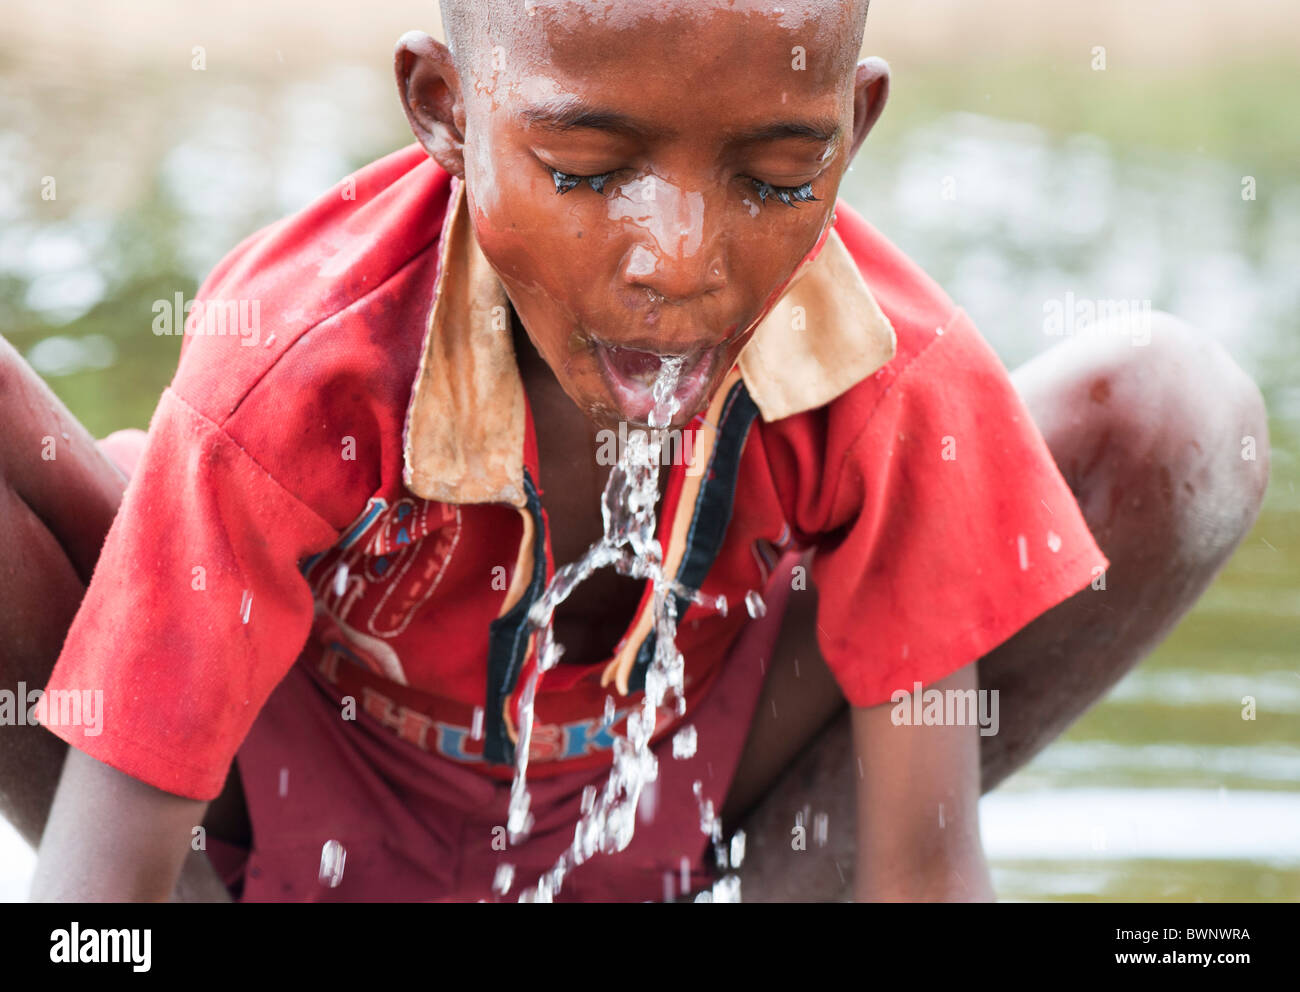 Indian street boy washing himself and drinking water in a river in the Indian countryside. Andhra Pradesh, India Stock Photo